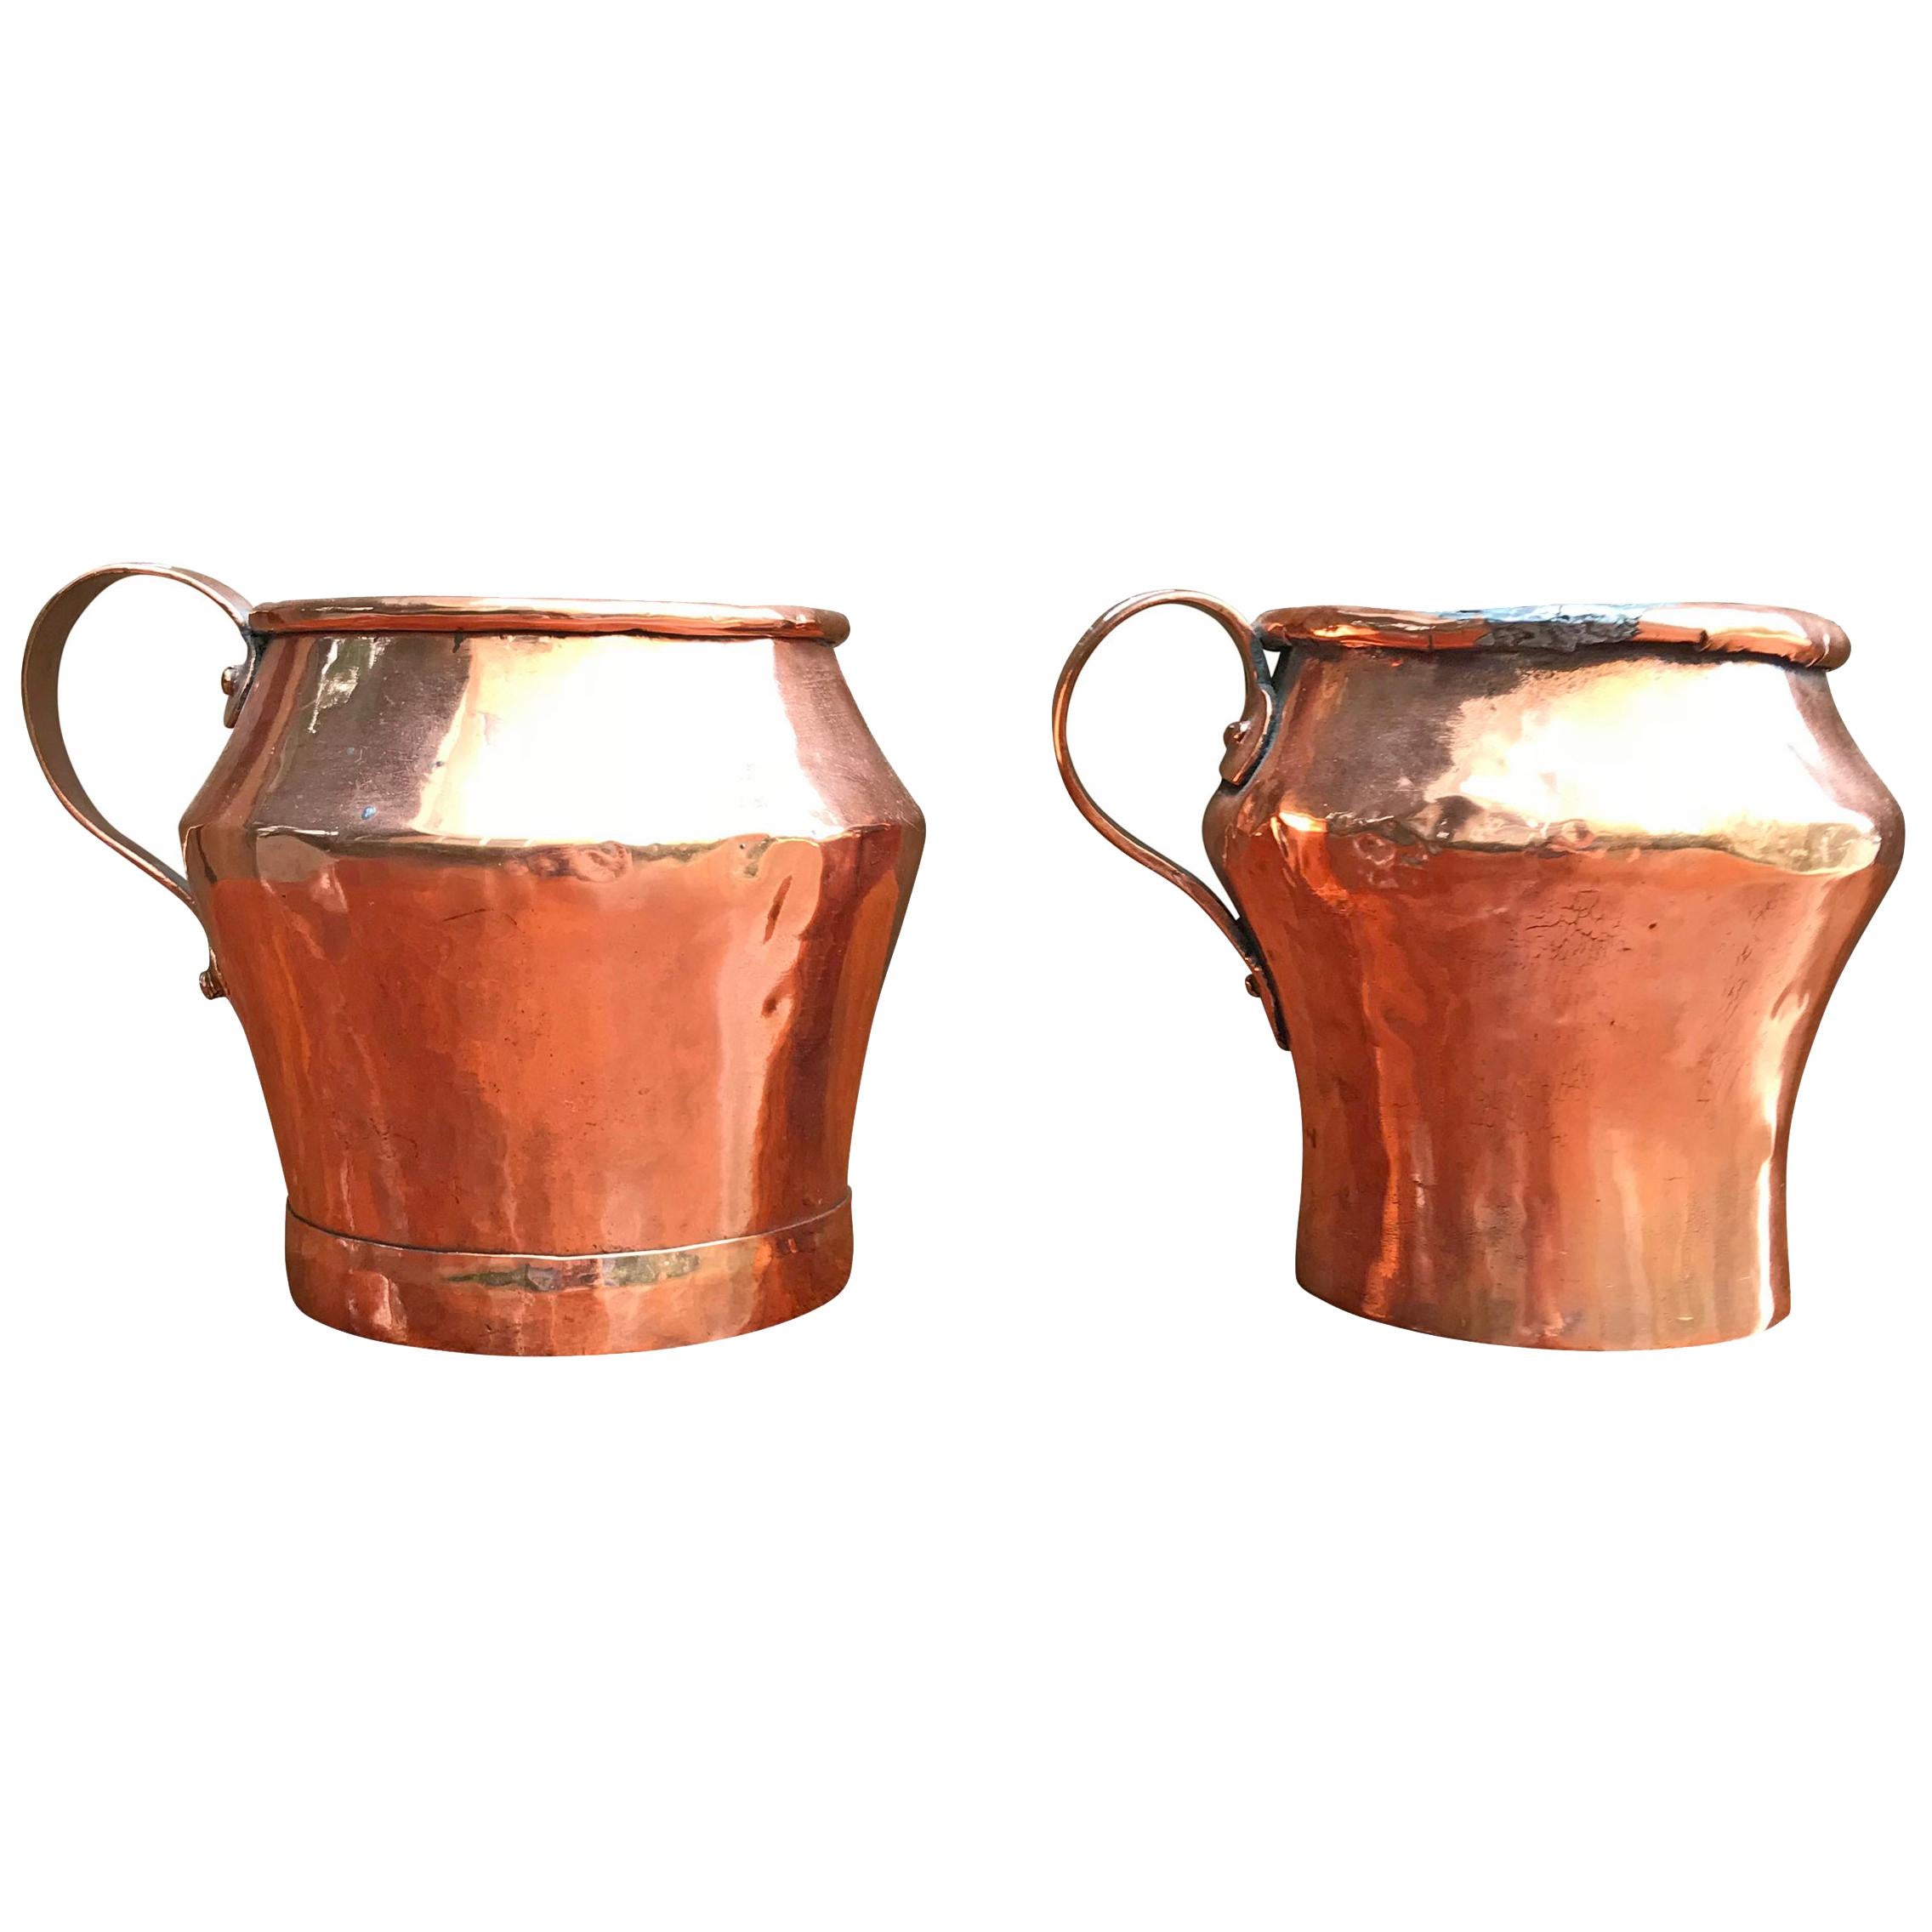 Pair of Early 19th Century English Copper Pitchers